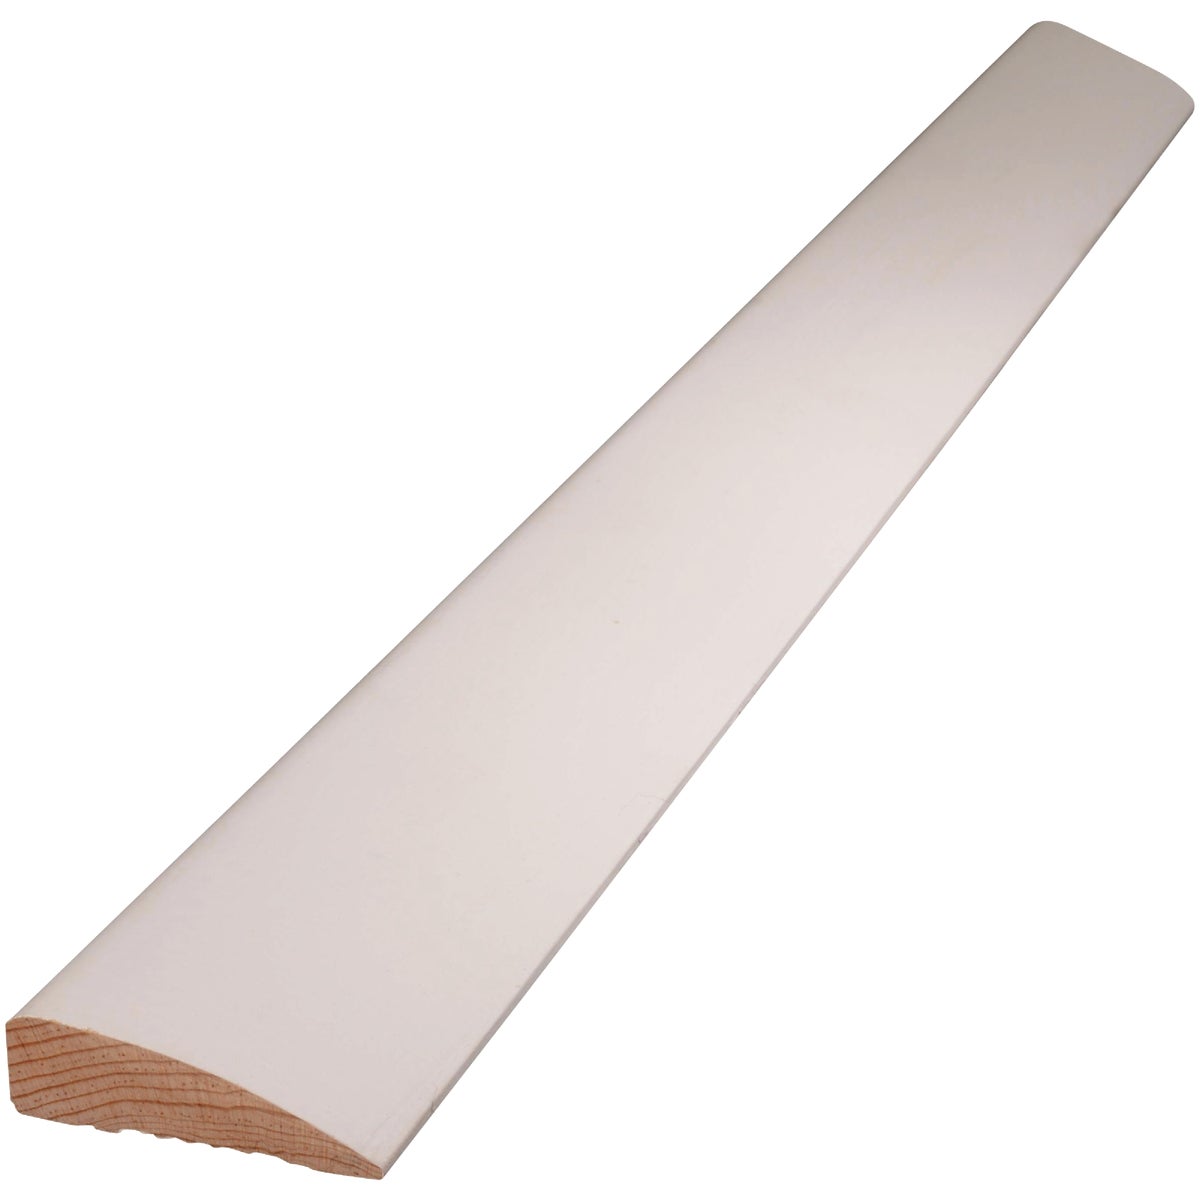 Alexandria Moulding 11/16 In. W. x 2-1/4 In. H. x 7 Ft. L. White Finger Joint Pine Ranch Casing